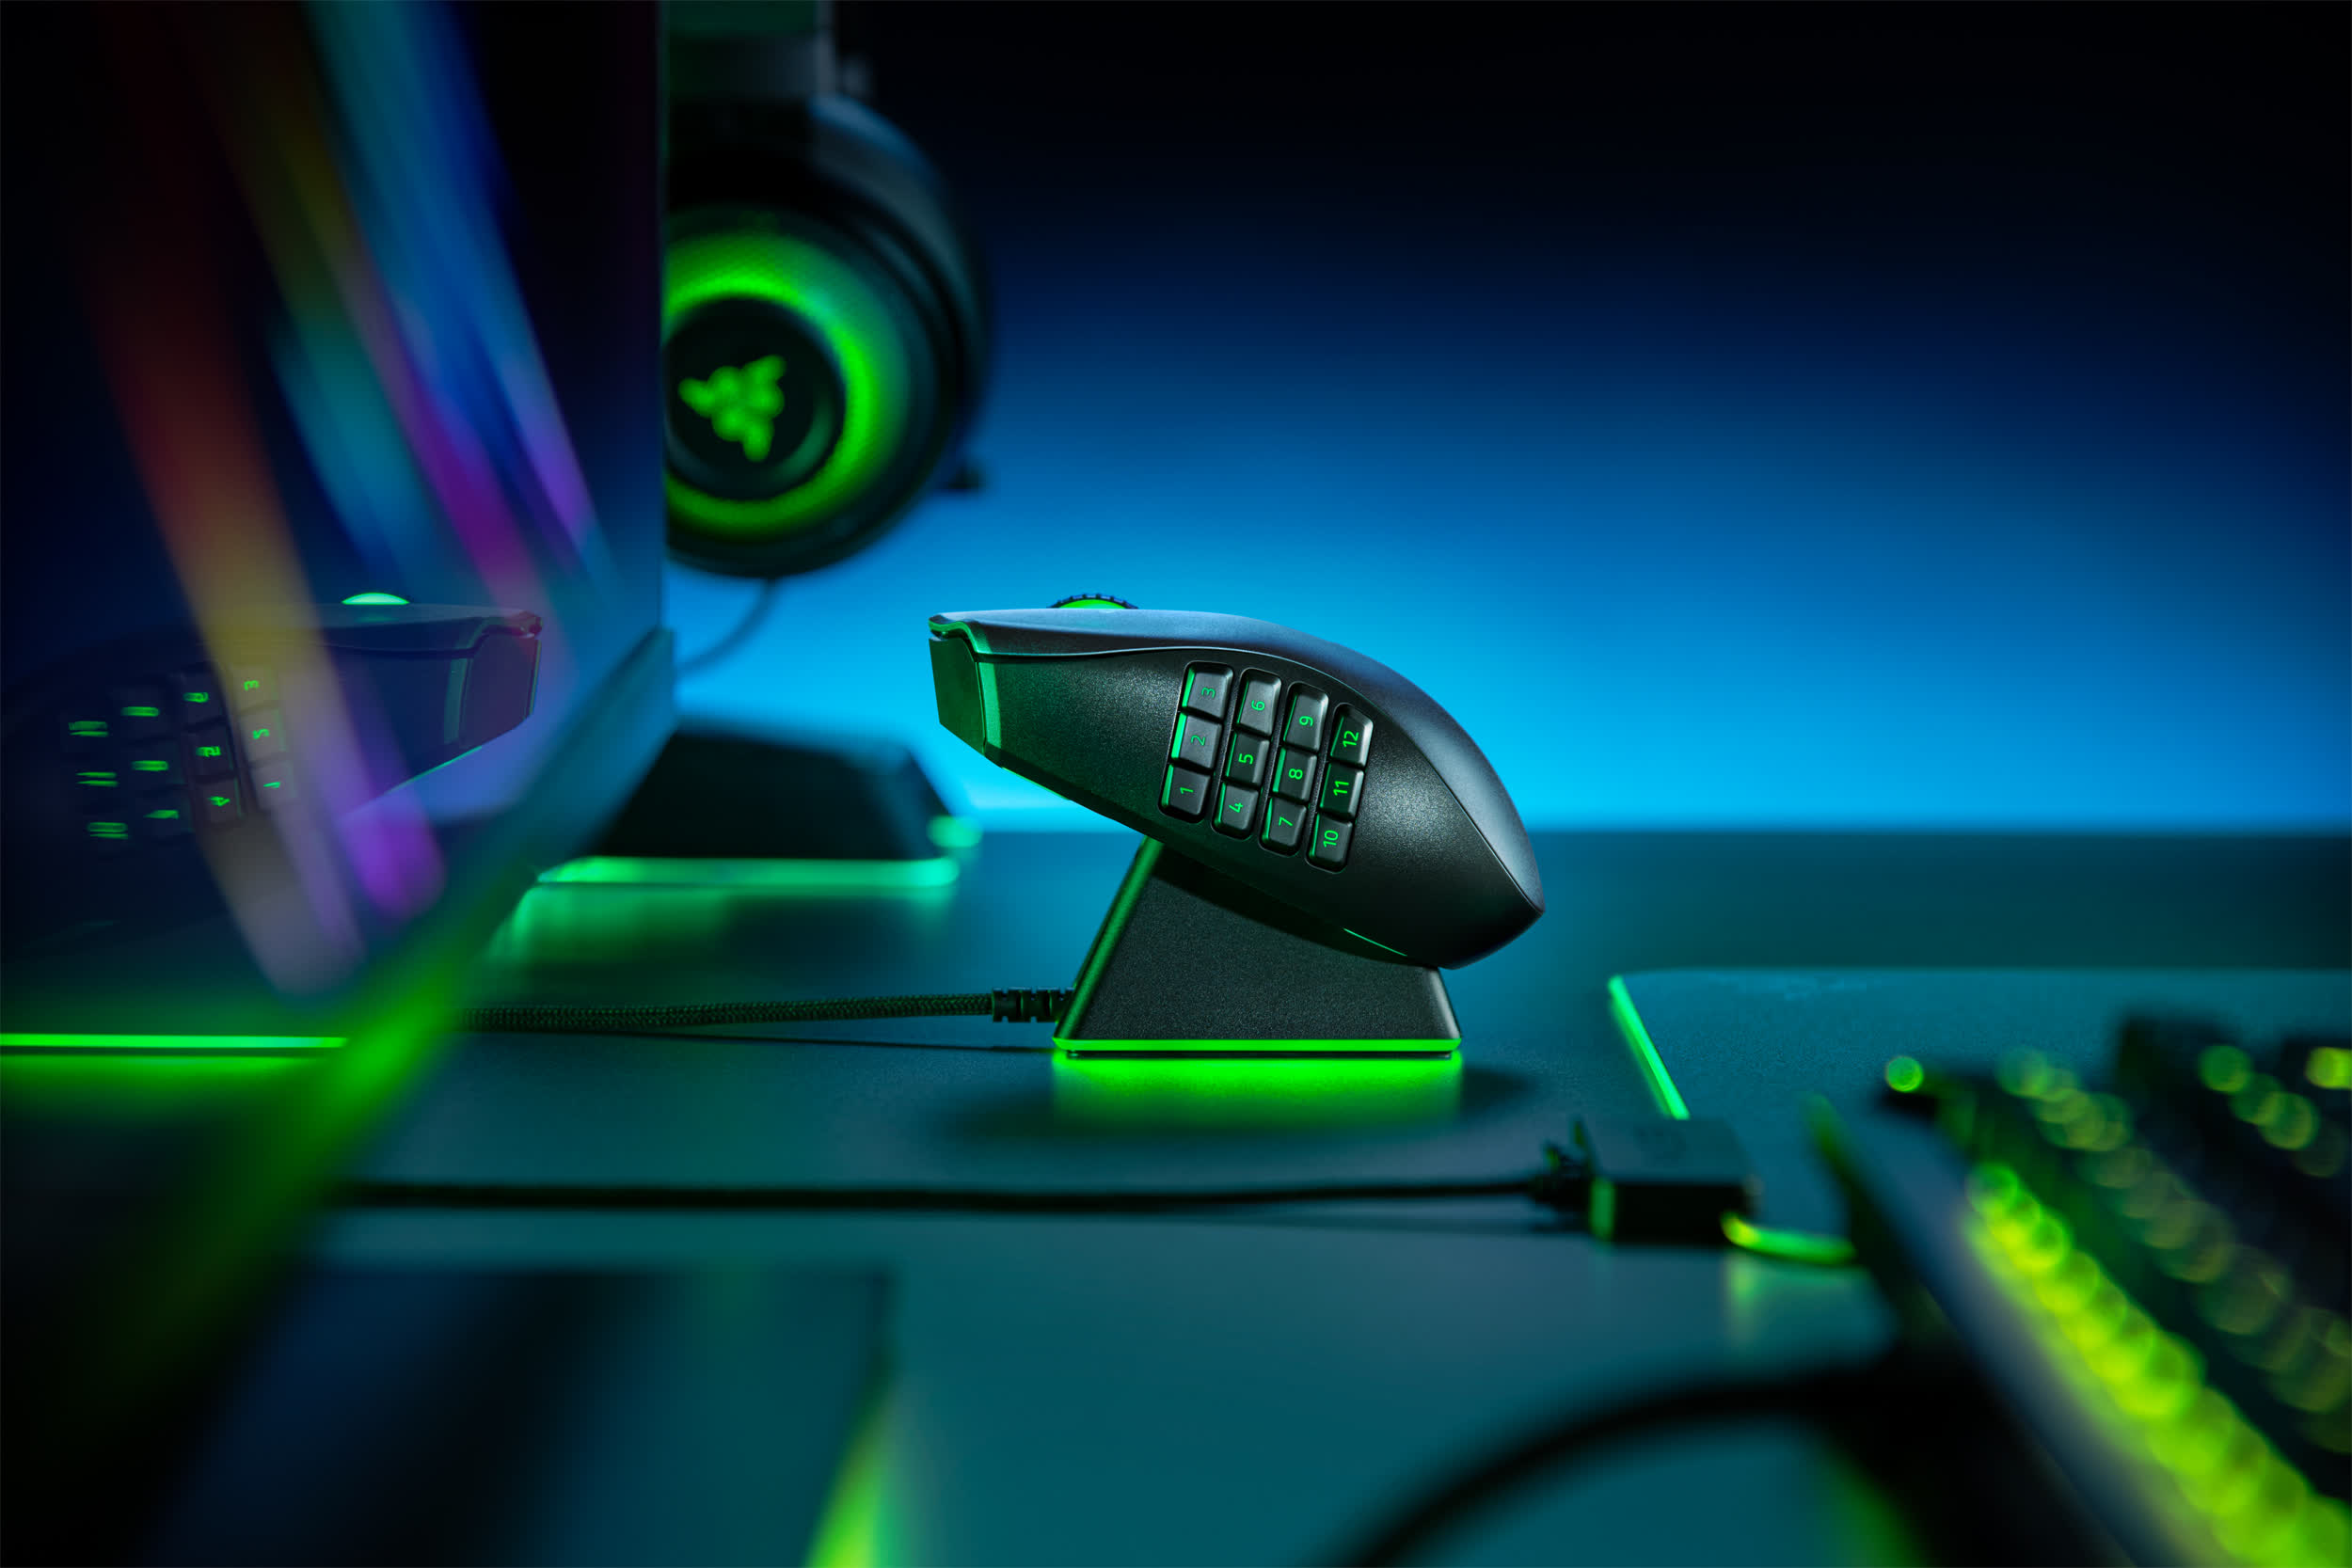 Razer's Naga Pro wireless gaming mouse can adapt to your play style